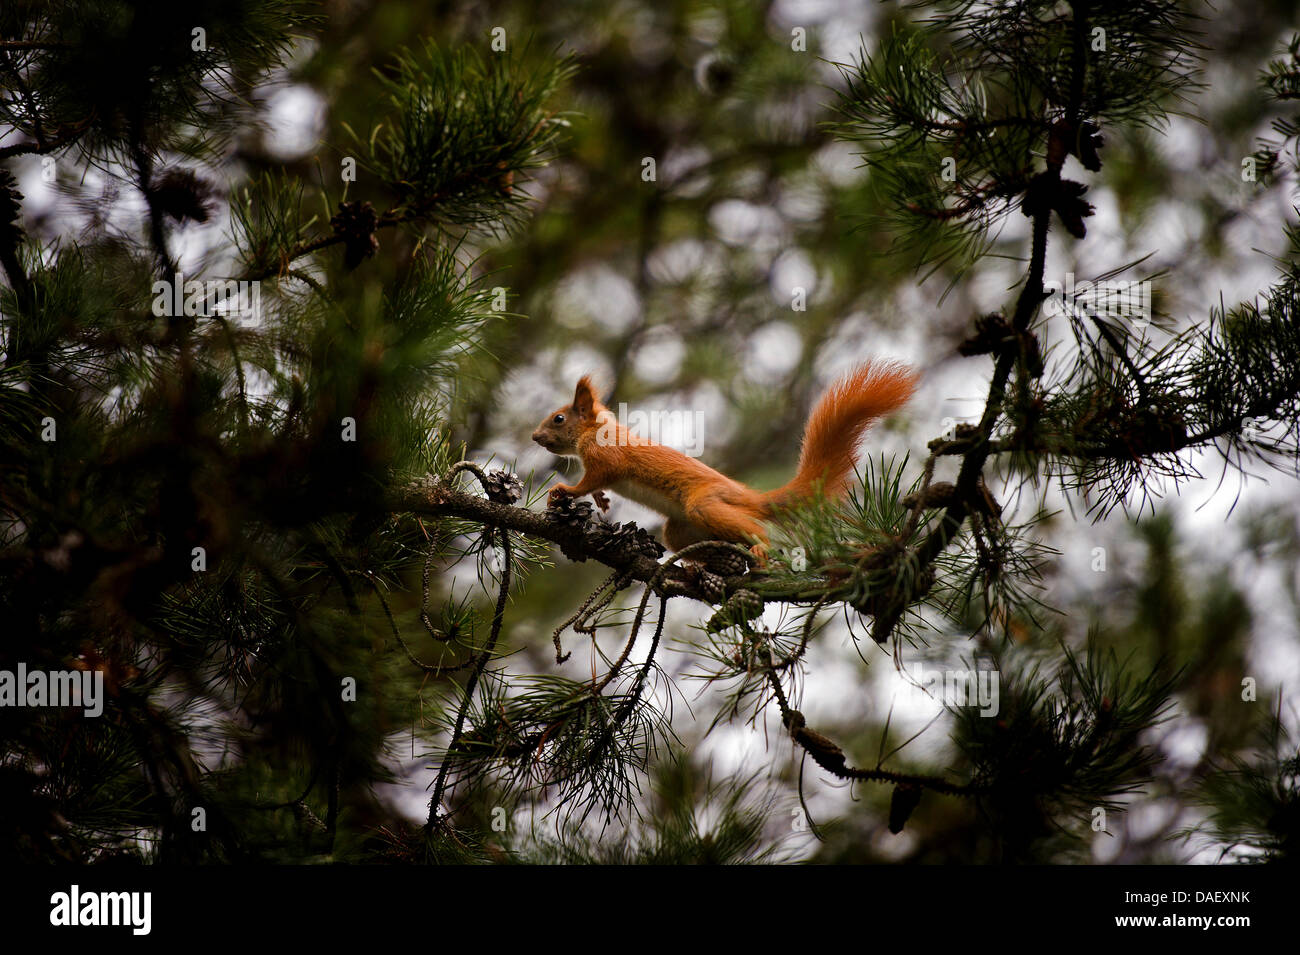 A squirrel climbs on the branch of a pine tree Dresden, Germany, 19 November 2011. With winter approaching, squirrels are collection food for winter. Phtoo: ARNO BURGI Stock Photo